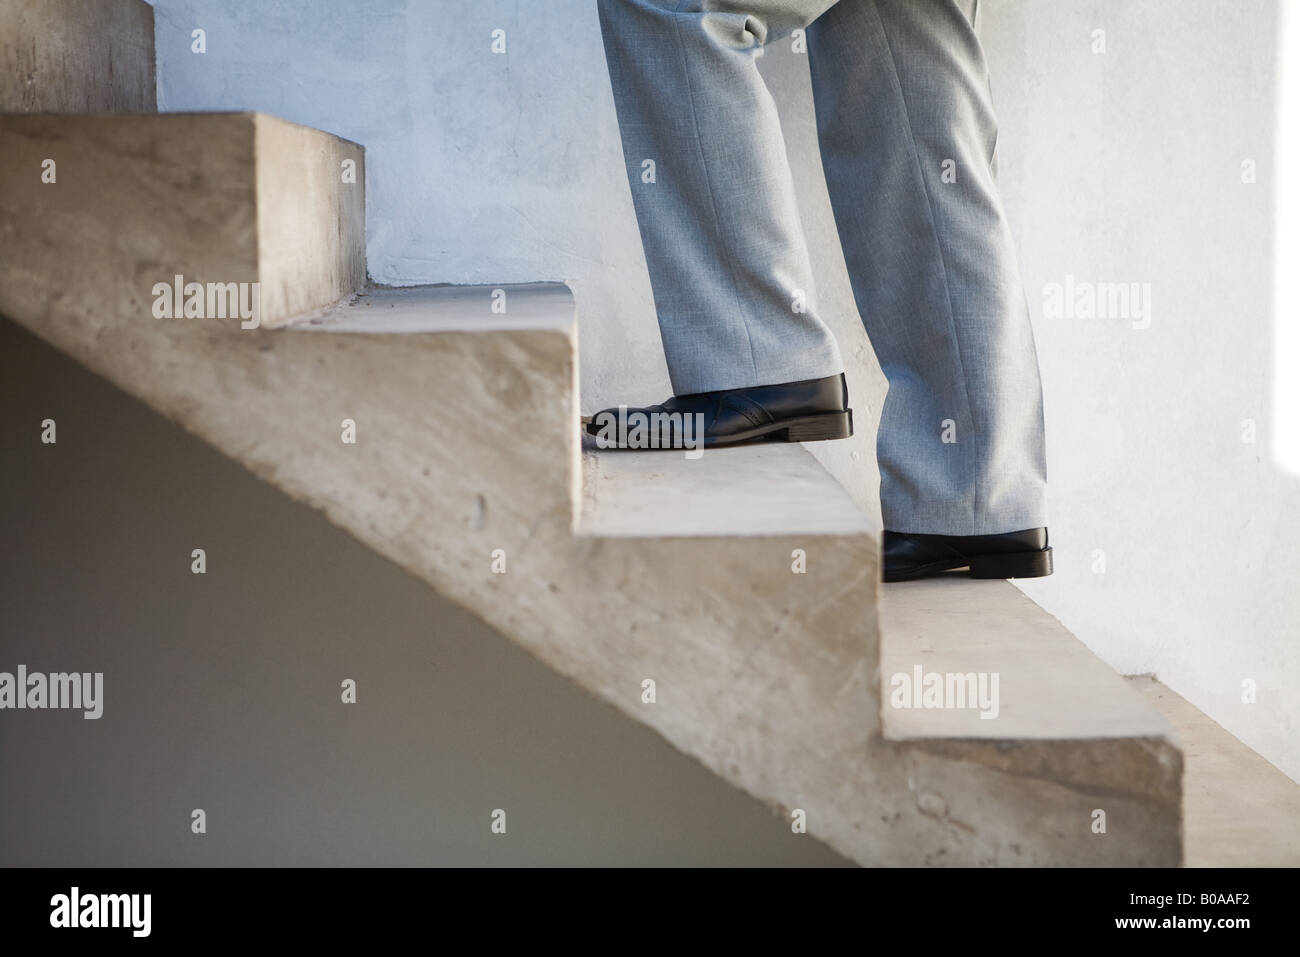 Man walking up staircase, side view, cropped Stock Photo